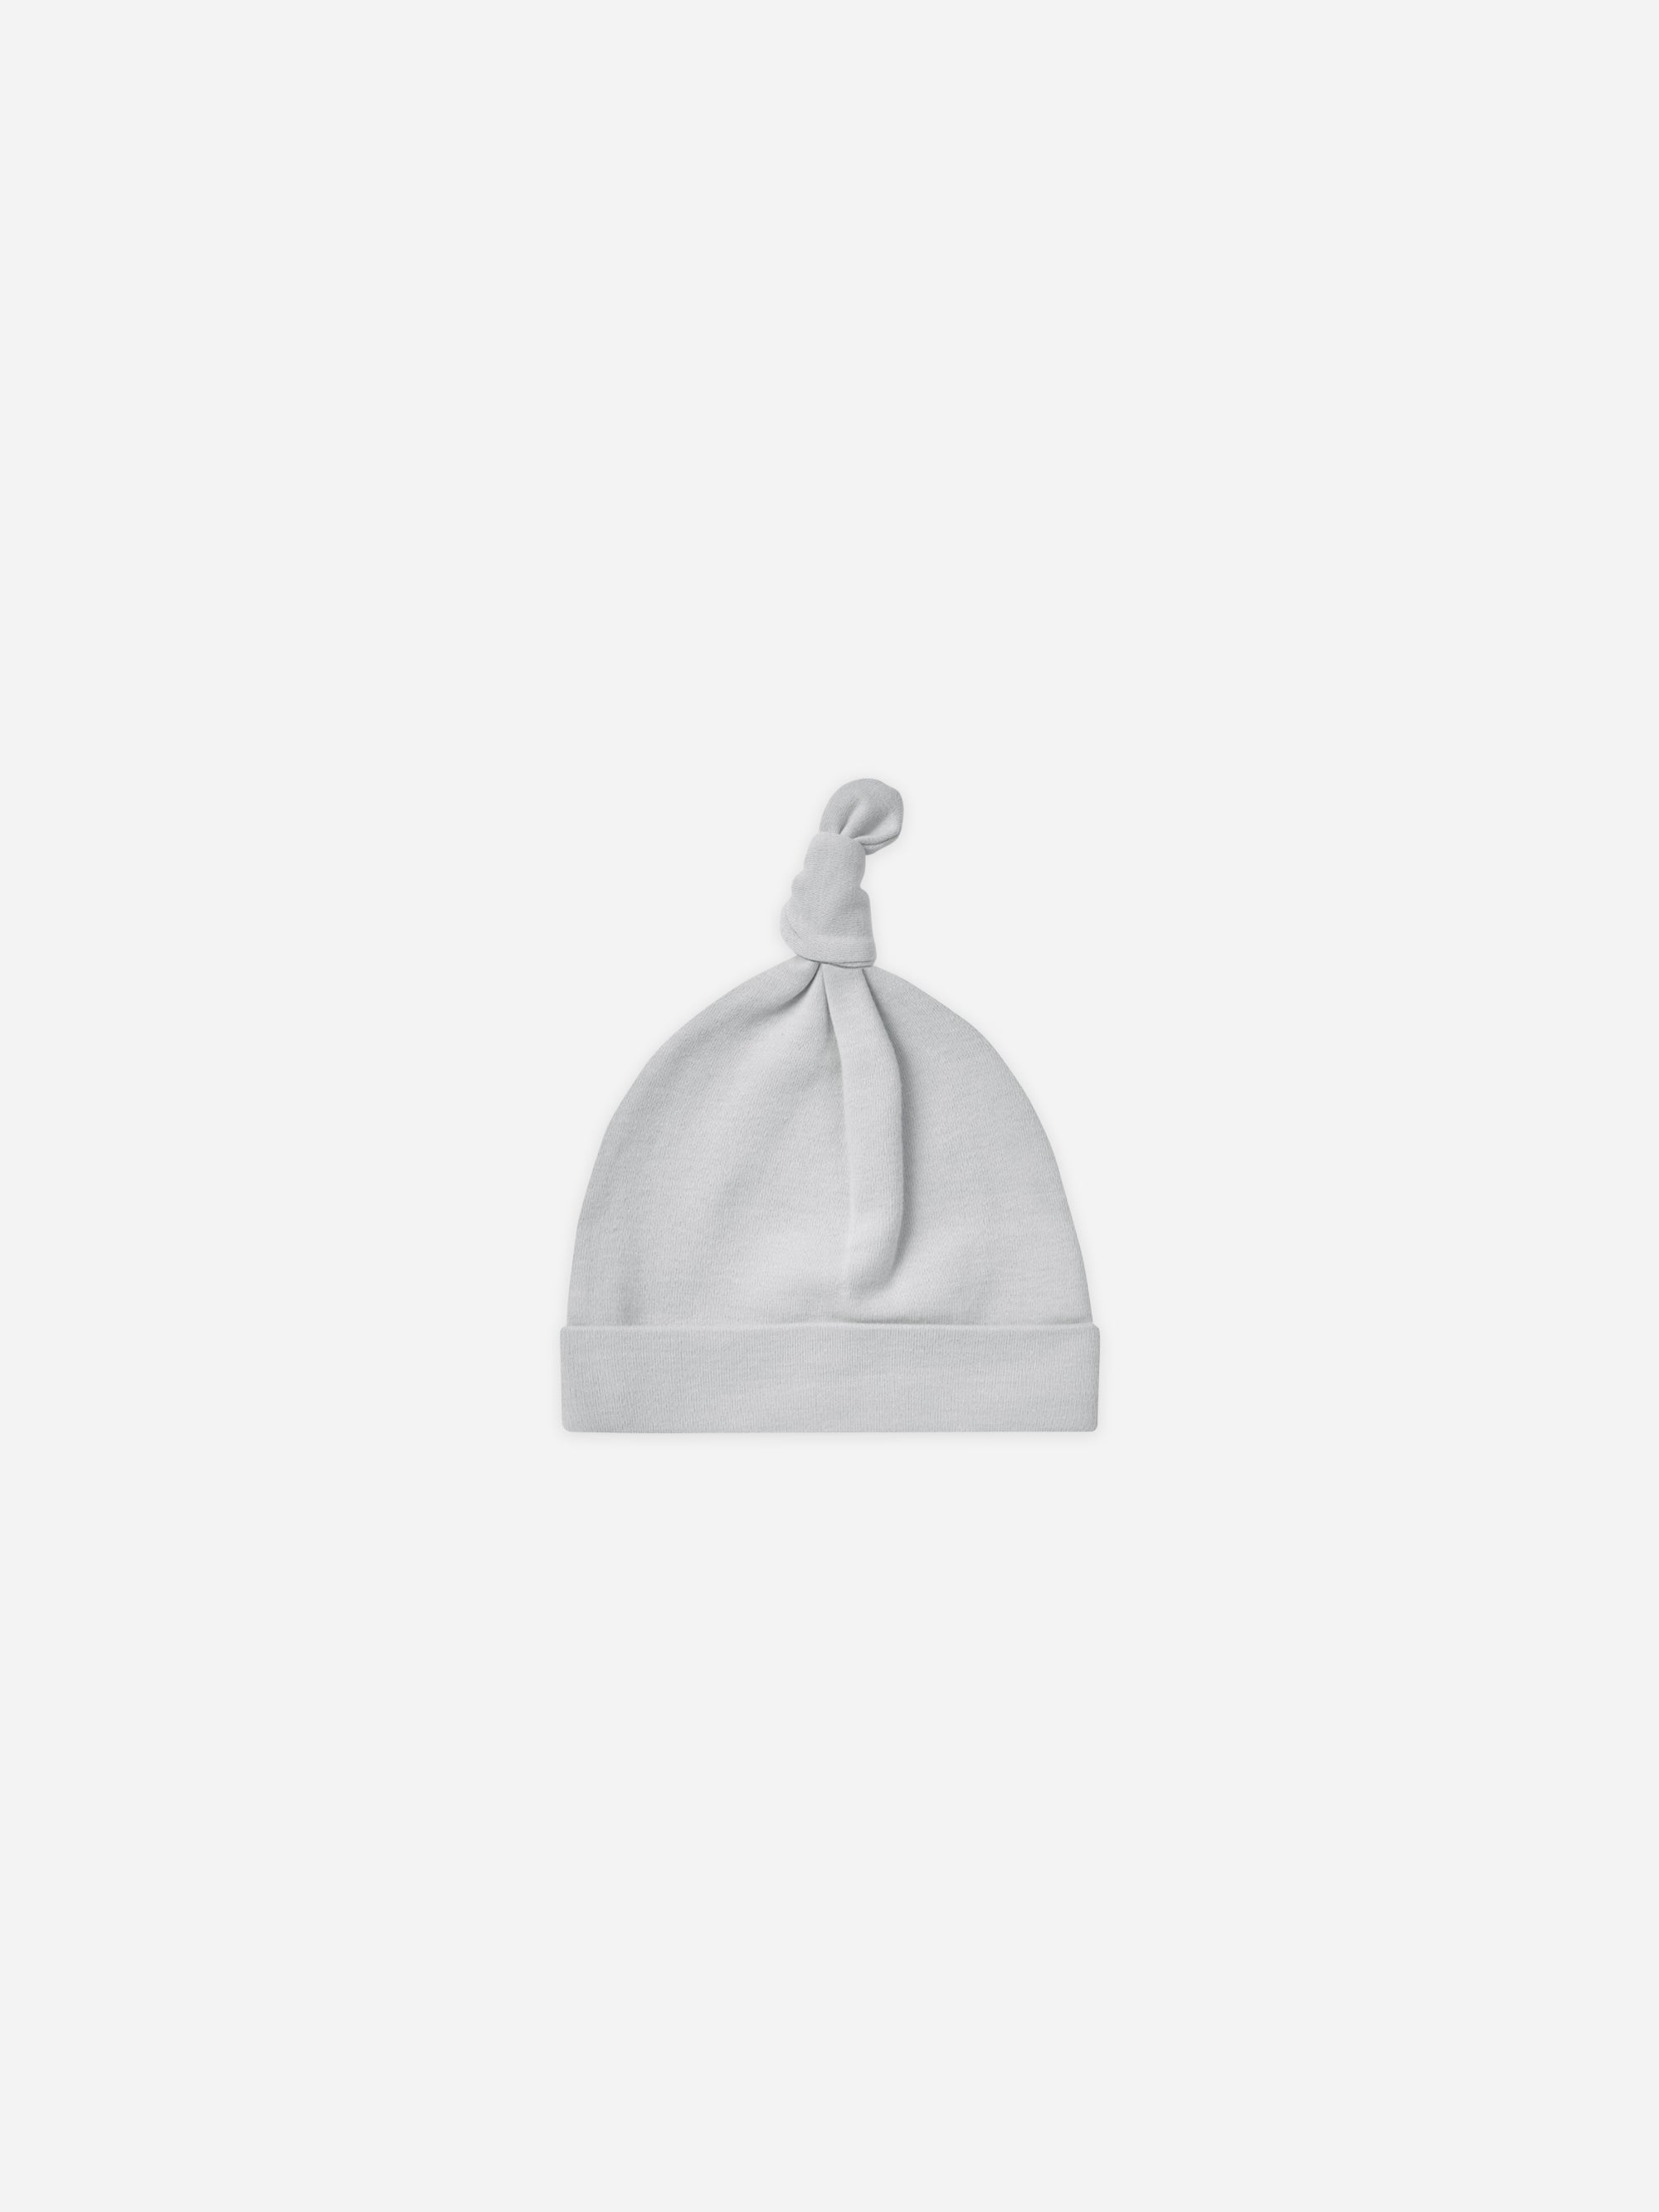 Knotted Baby Hat || Cloud - Rylee + Cru | Kids Clothes | Trendy Baby Clothes | Modern Infant Outfits |